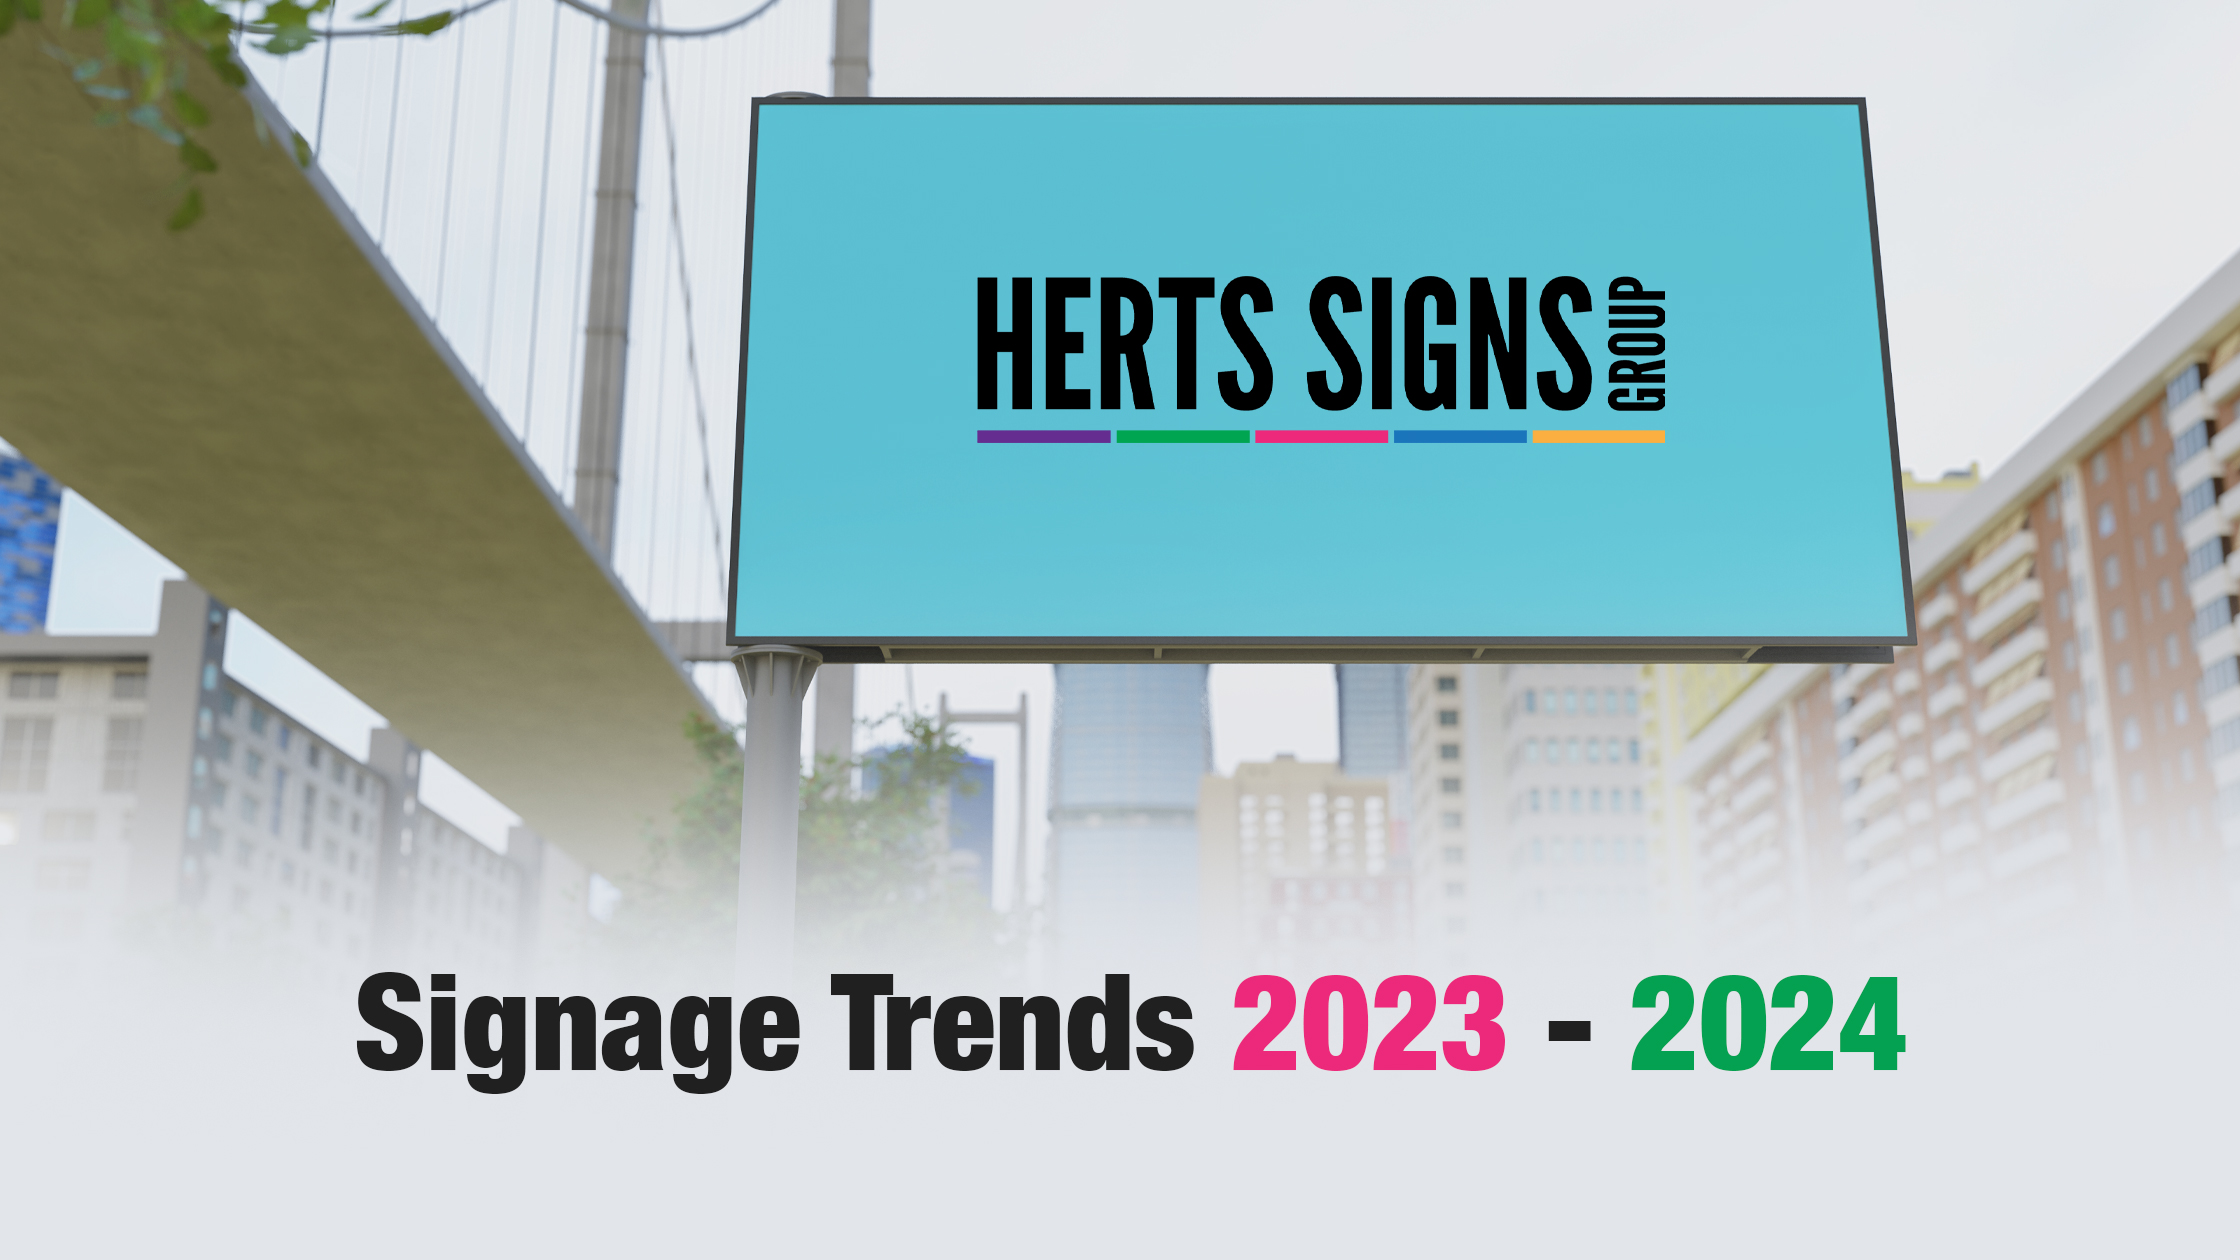 Signage Trends 2023 - 2024 - Herts Signs